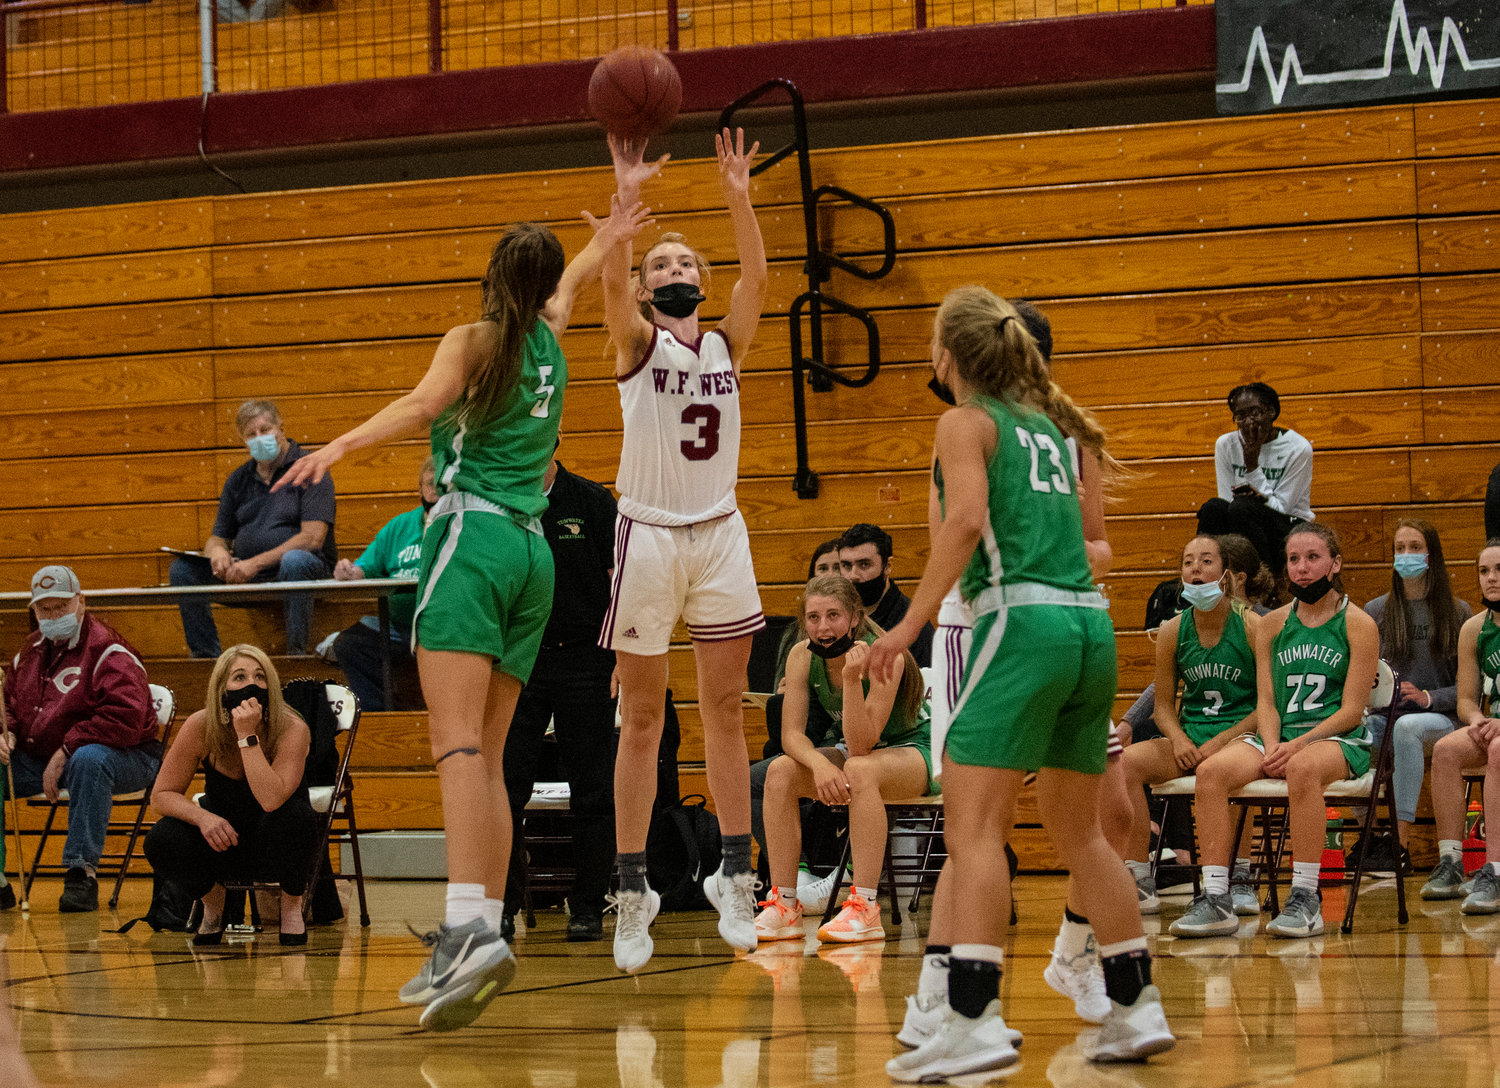 W.F. West's Lexi Roberts (3) puts up a 3-point shot over the hand of Tumwater's Natalie Sumrok (5) on monday.